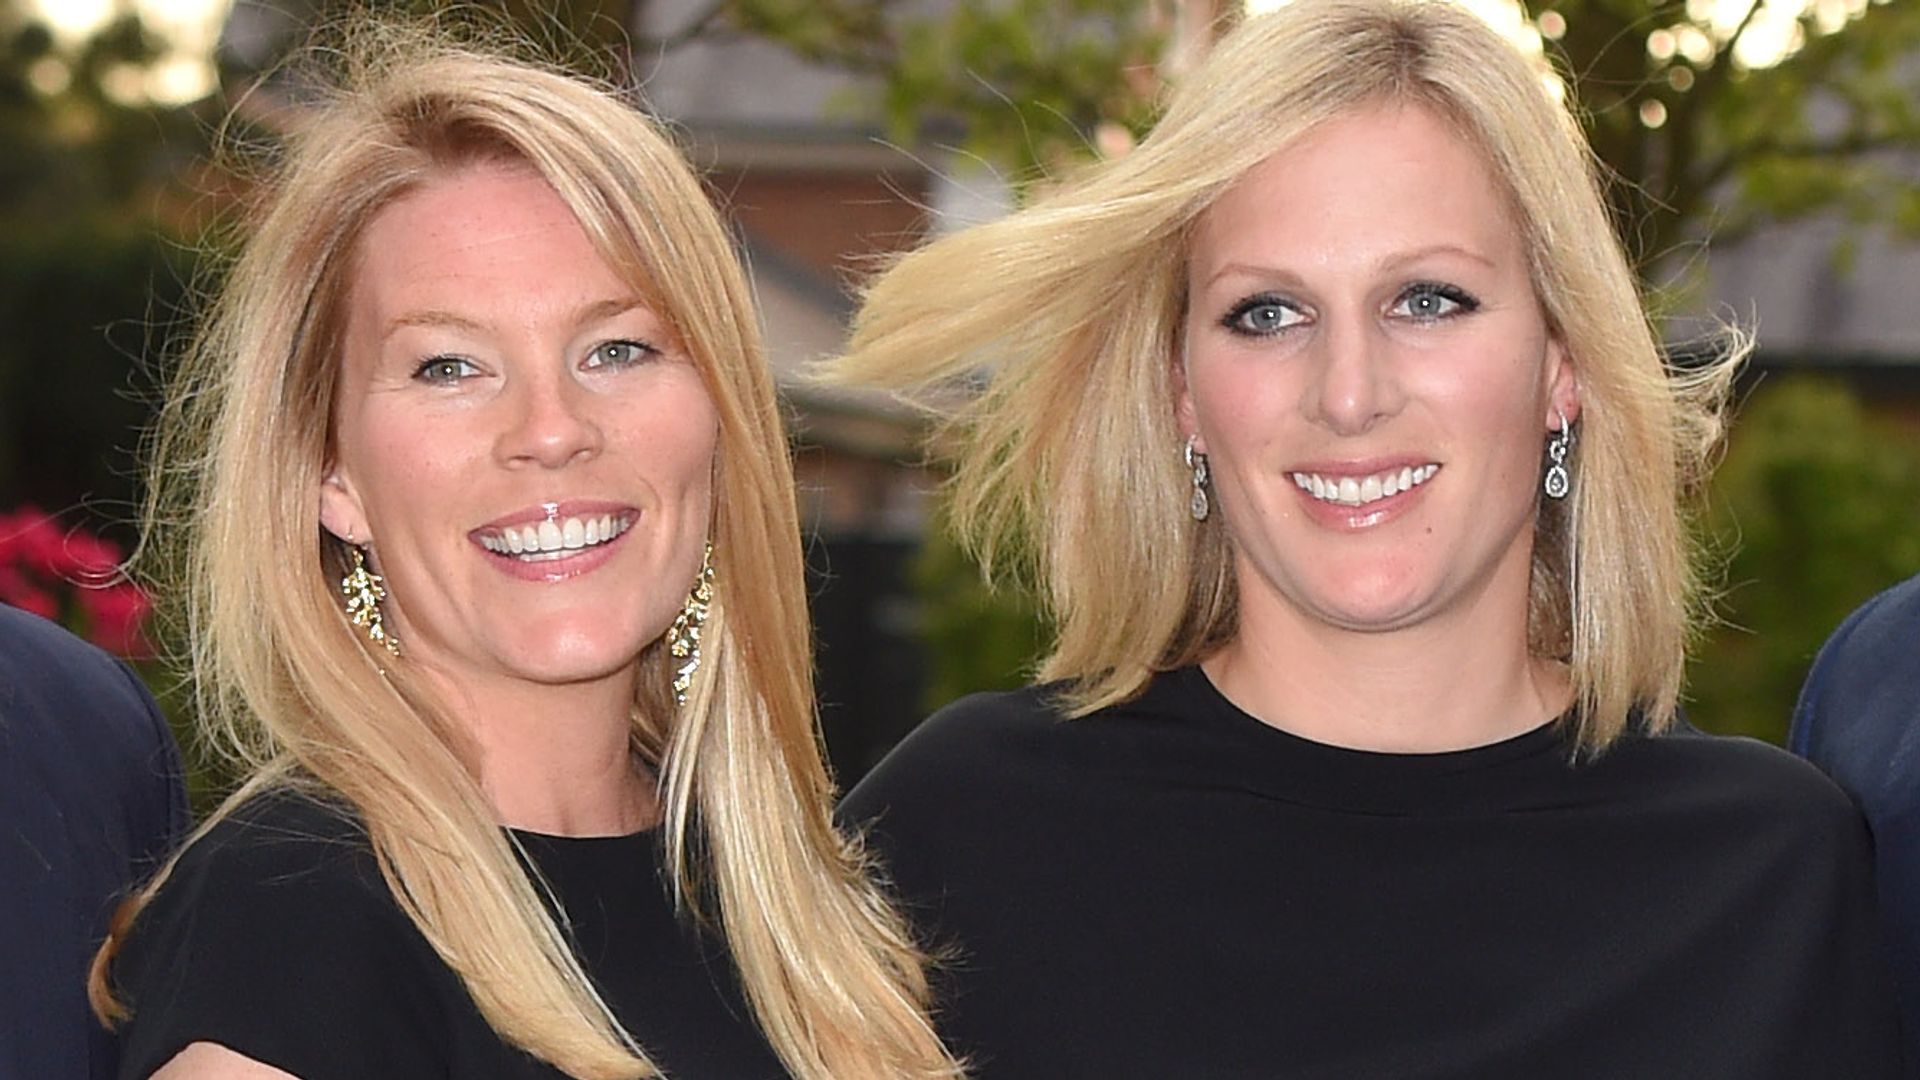 Autumn Phillips and Zara Tindall in matching black outfits